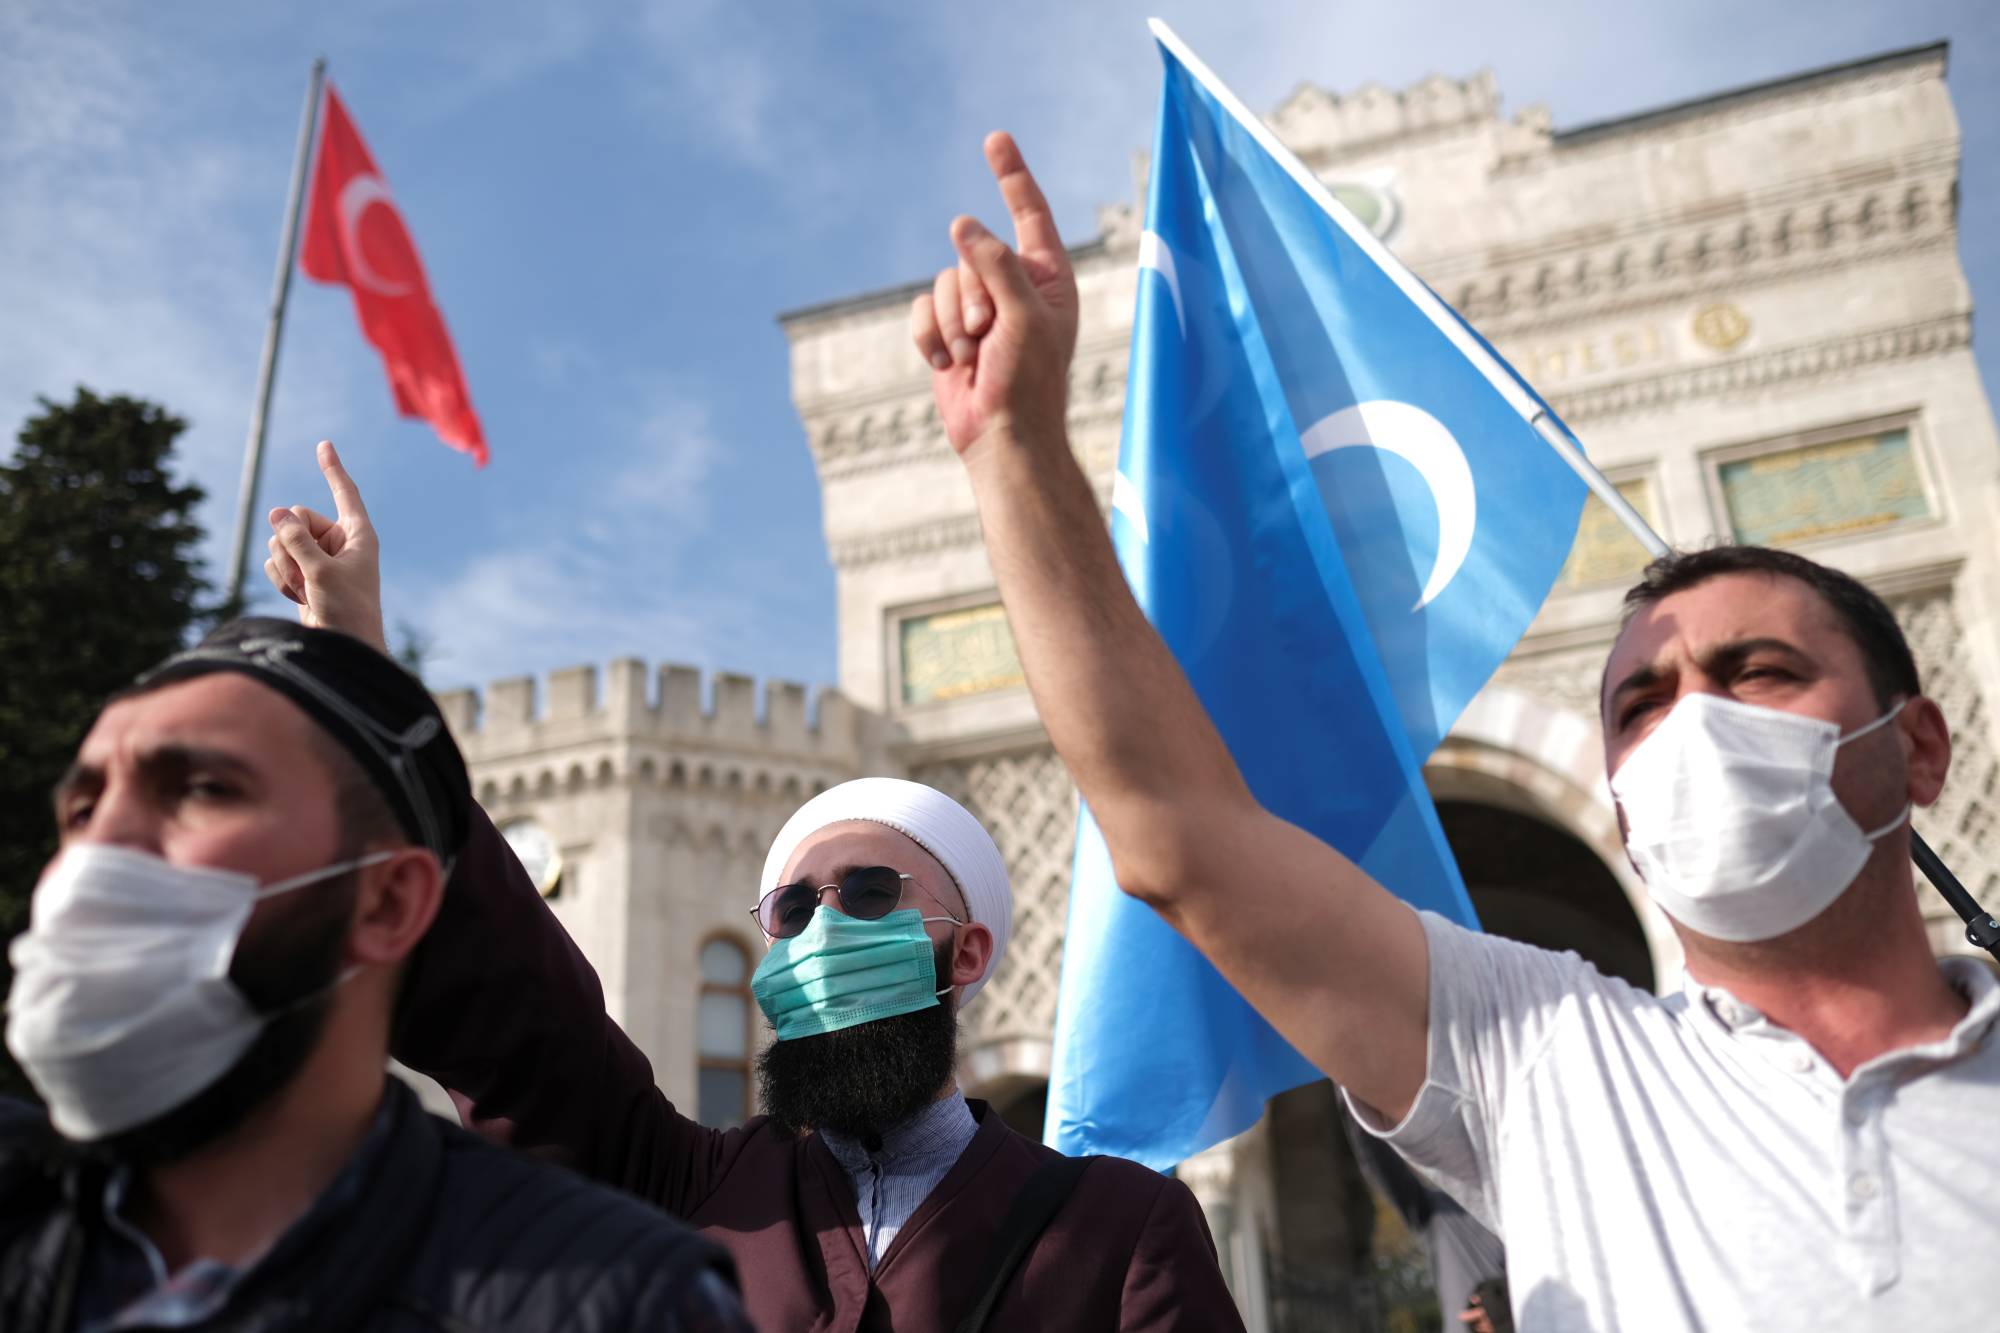 Demonstrators shout slogans during a protest in Istanbul on Oct. 25 after French President Emmanuel Macron pledged to defend secularism against radical Islam after the decapitation murder of a school teacher by a Chechen immigrant in Nice, France. | REUTERS